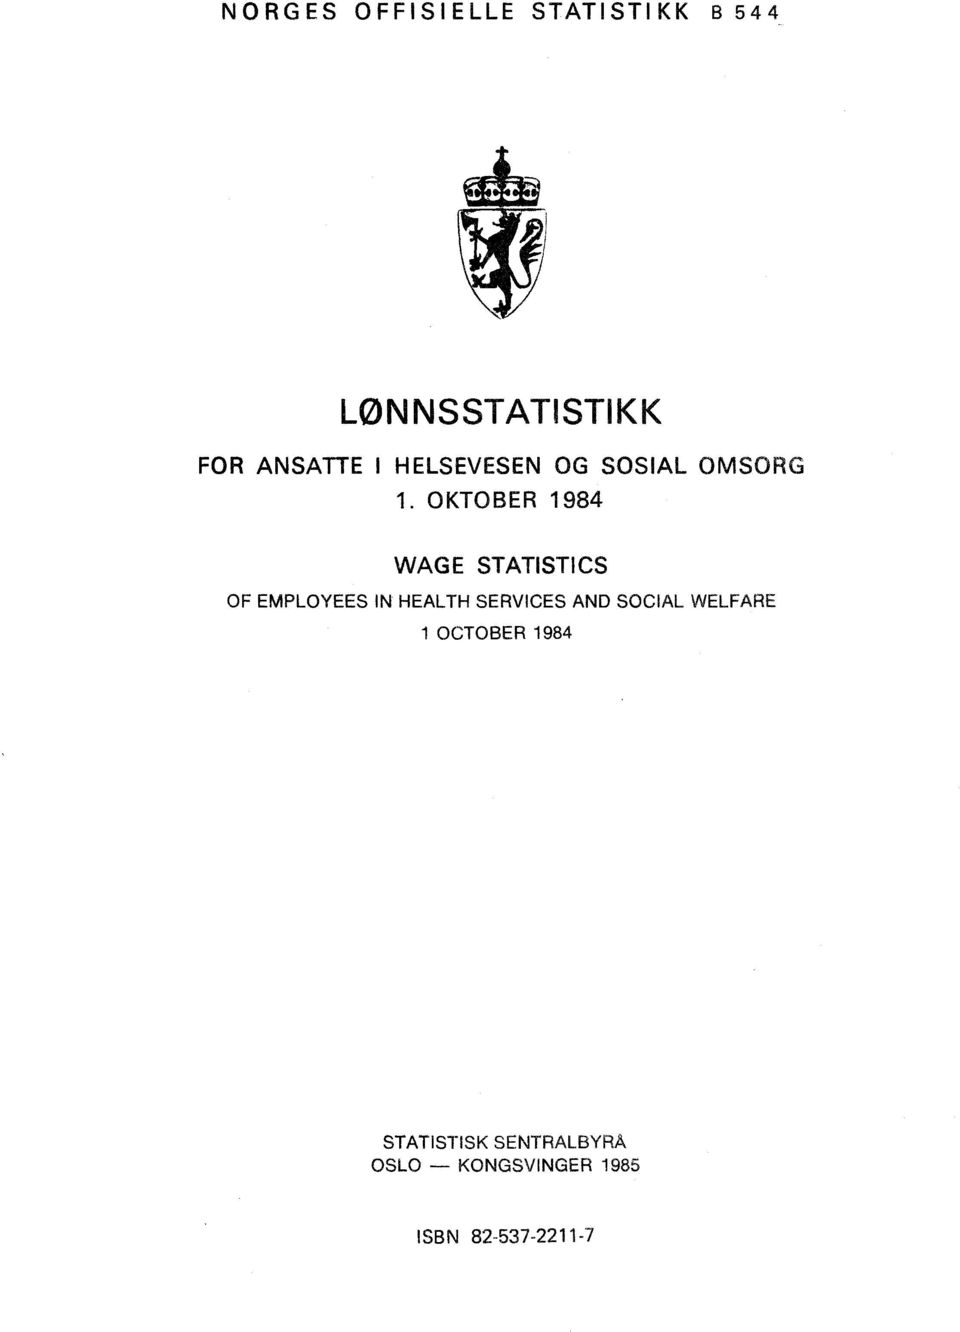 OKTOBER 1984 WAGE STATISTICS OF EMPLOYEES IN HEALTH SERVICES